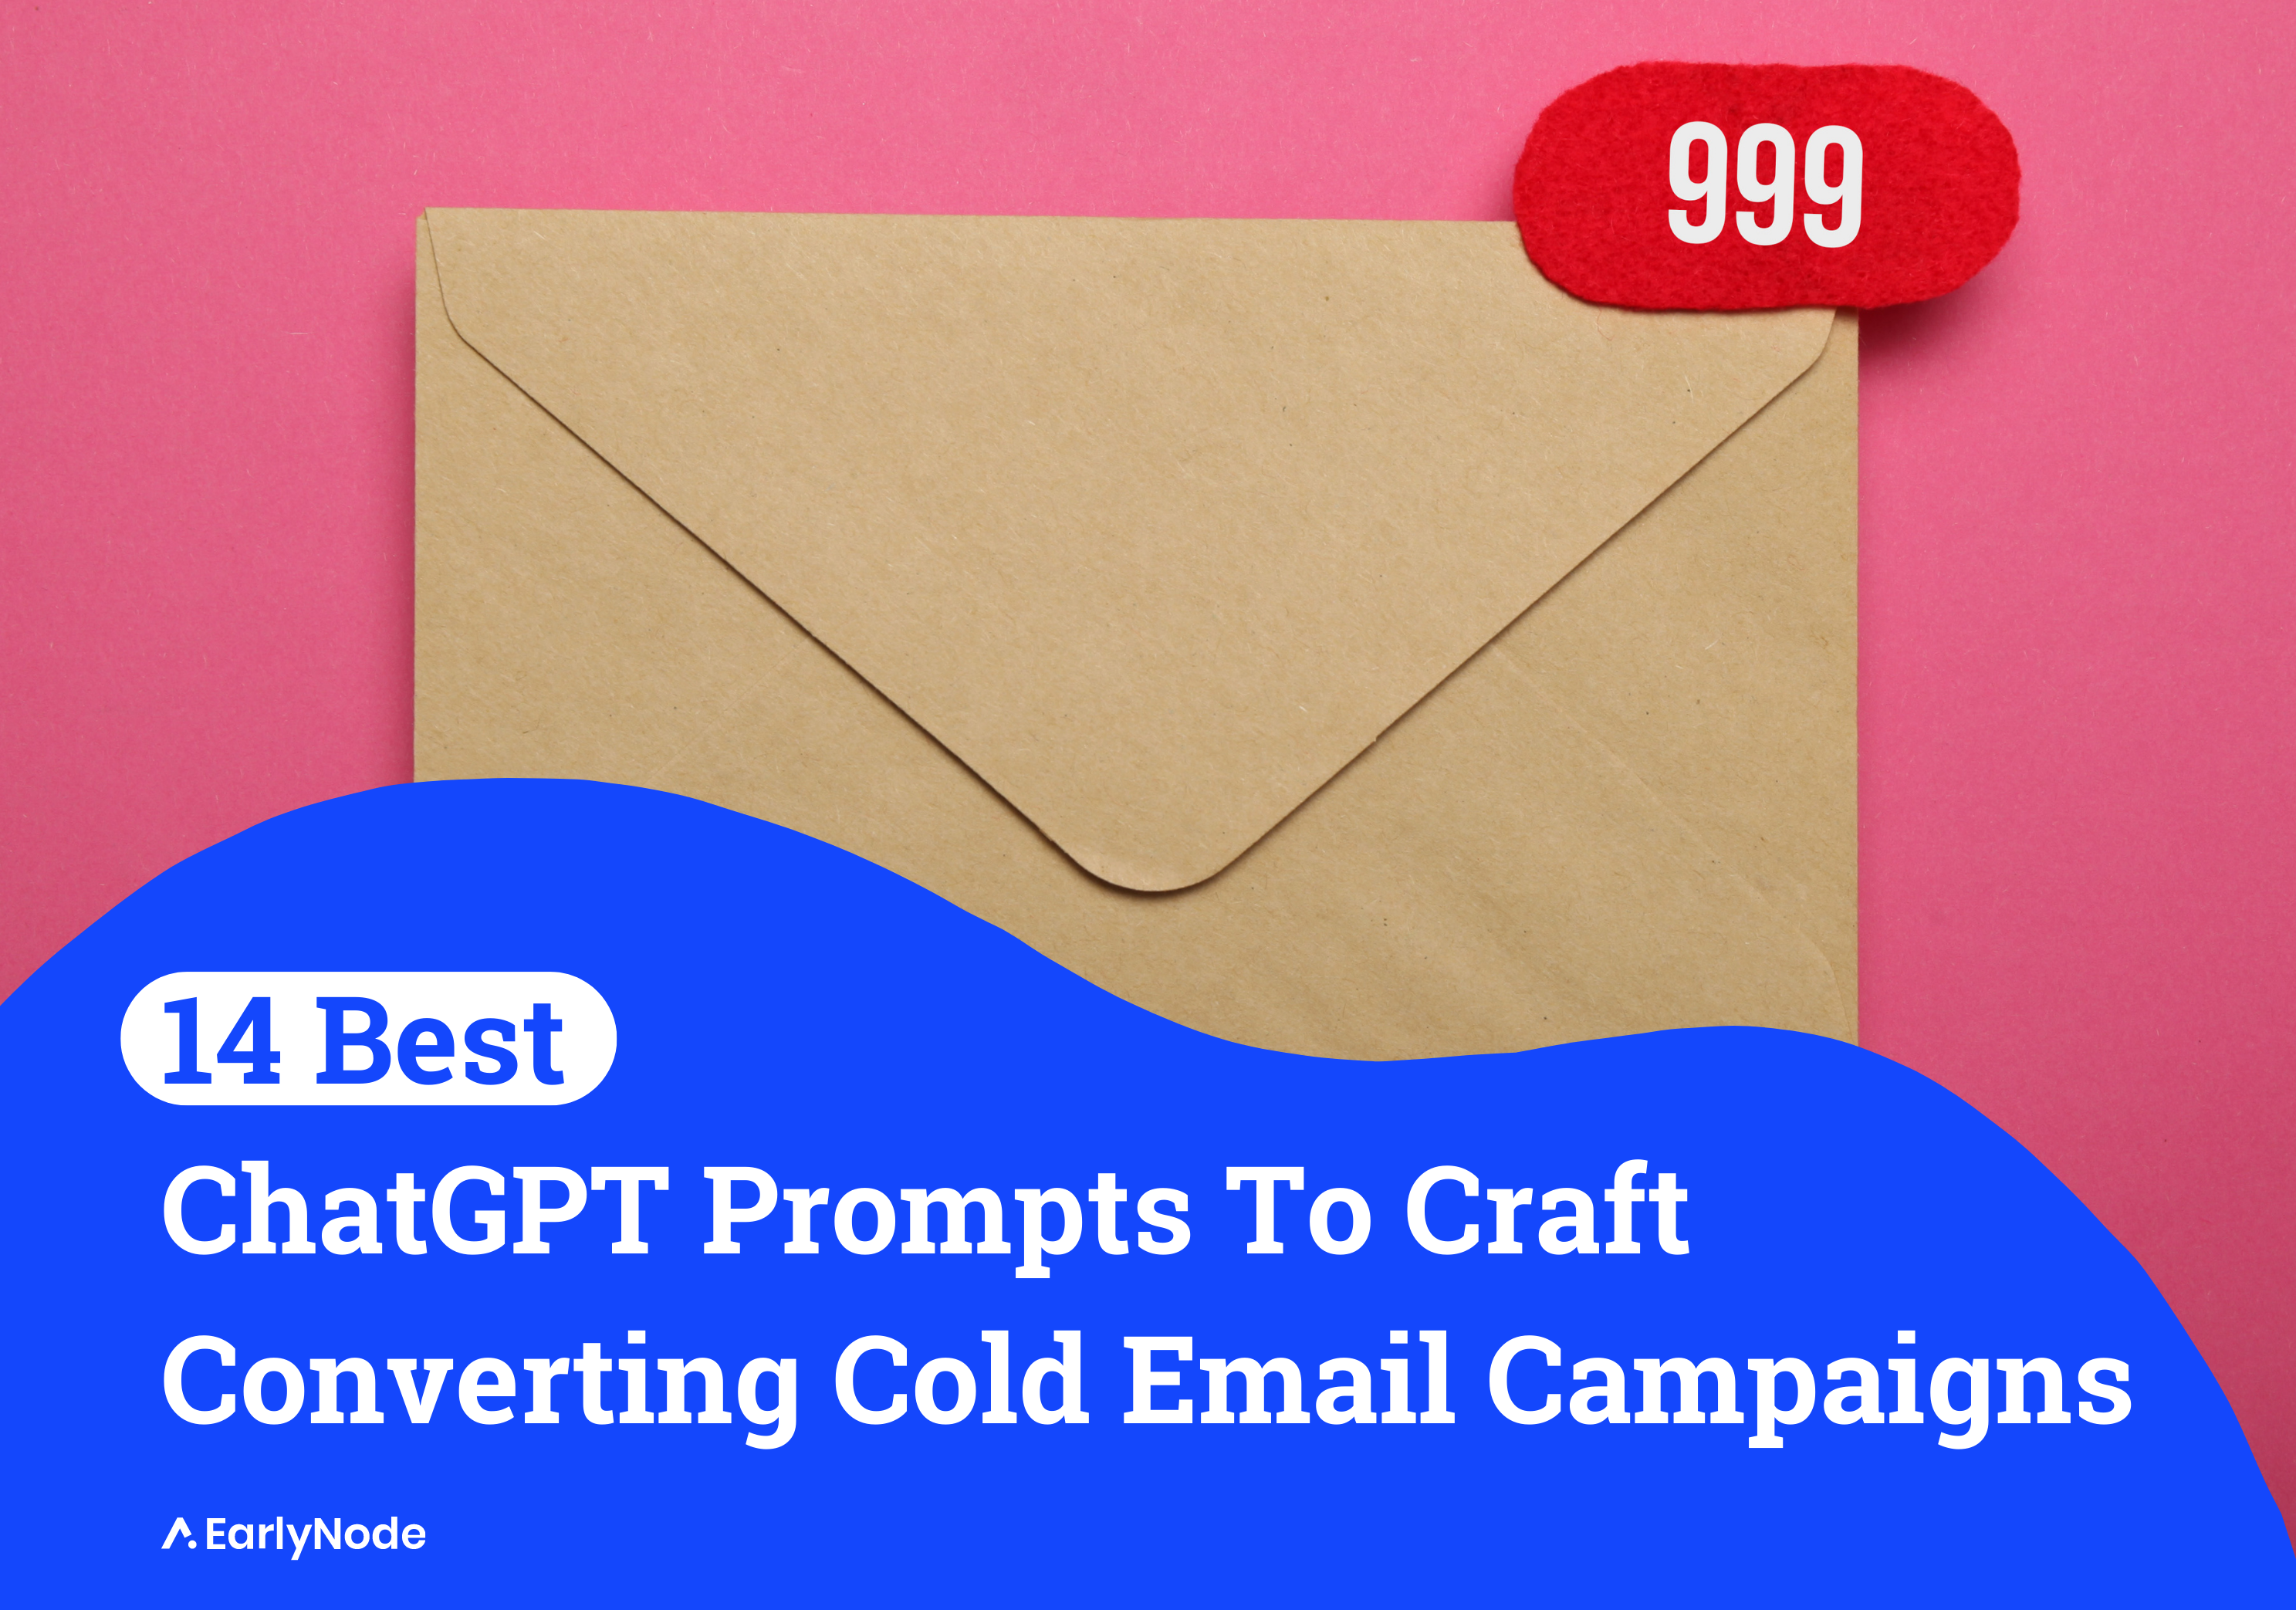 14 ChatGPT Prompts For Crafting Converting Cold Email Outreach Campaigns